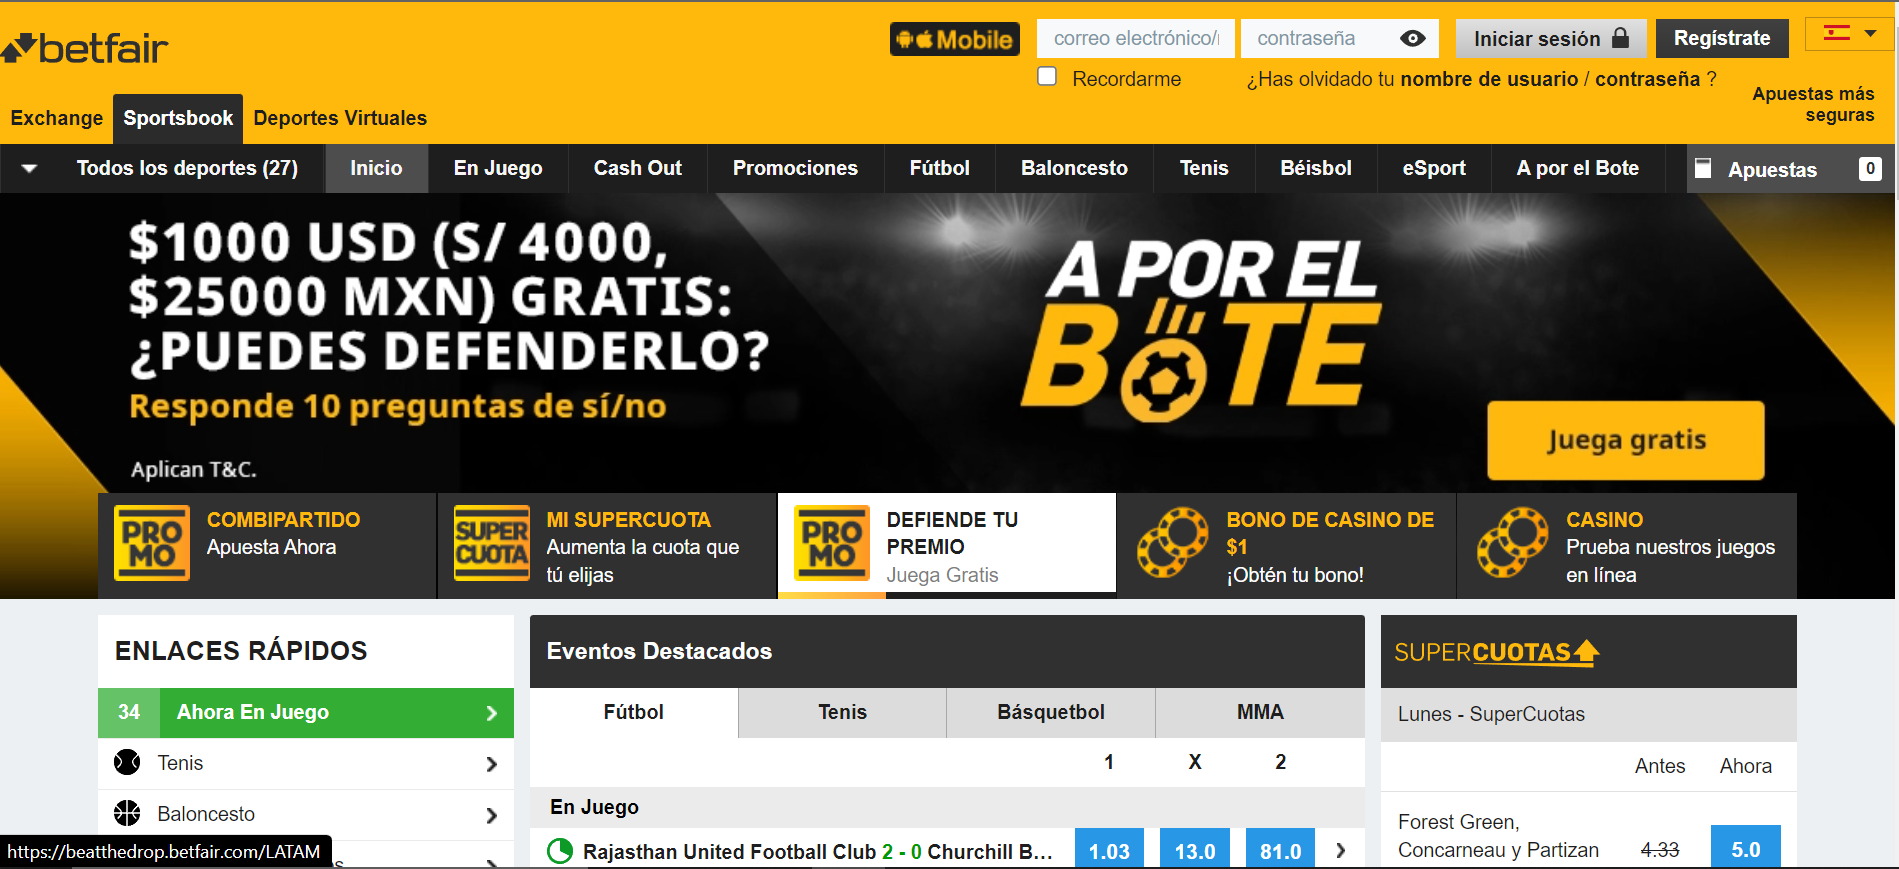 Sports betting as offered by Betfair along with added benefits from promotions.